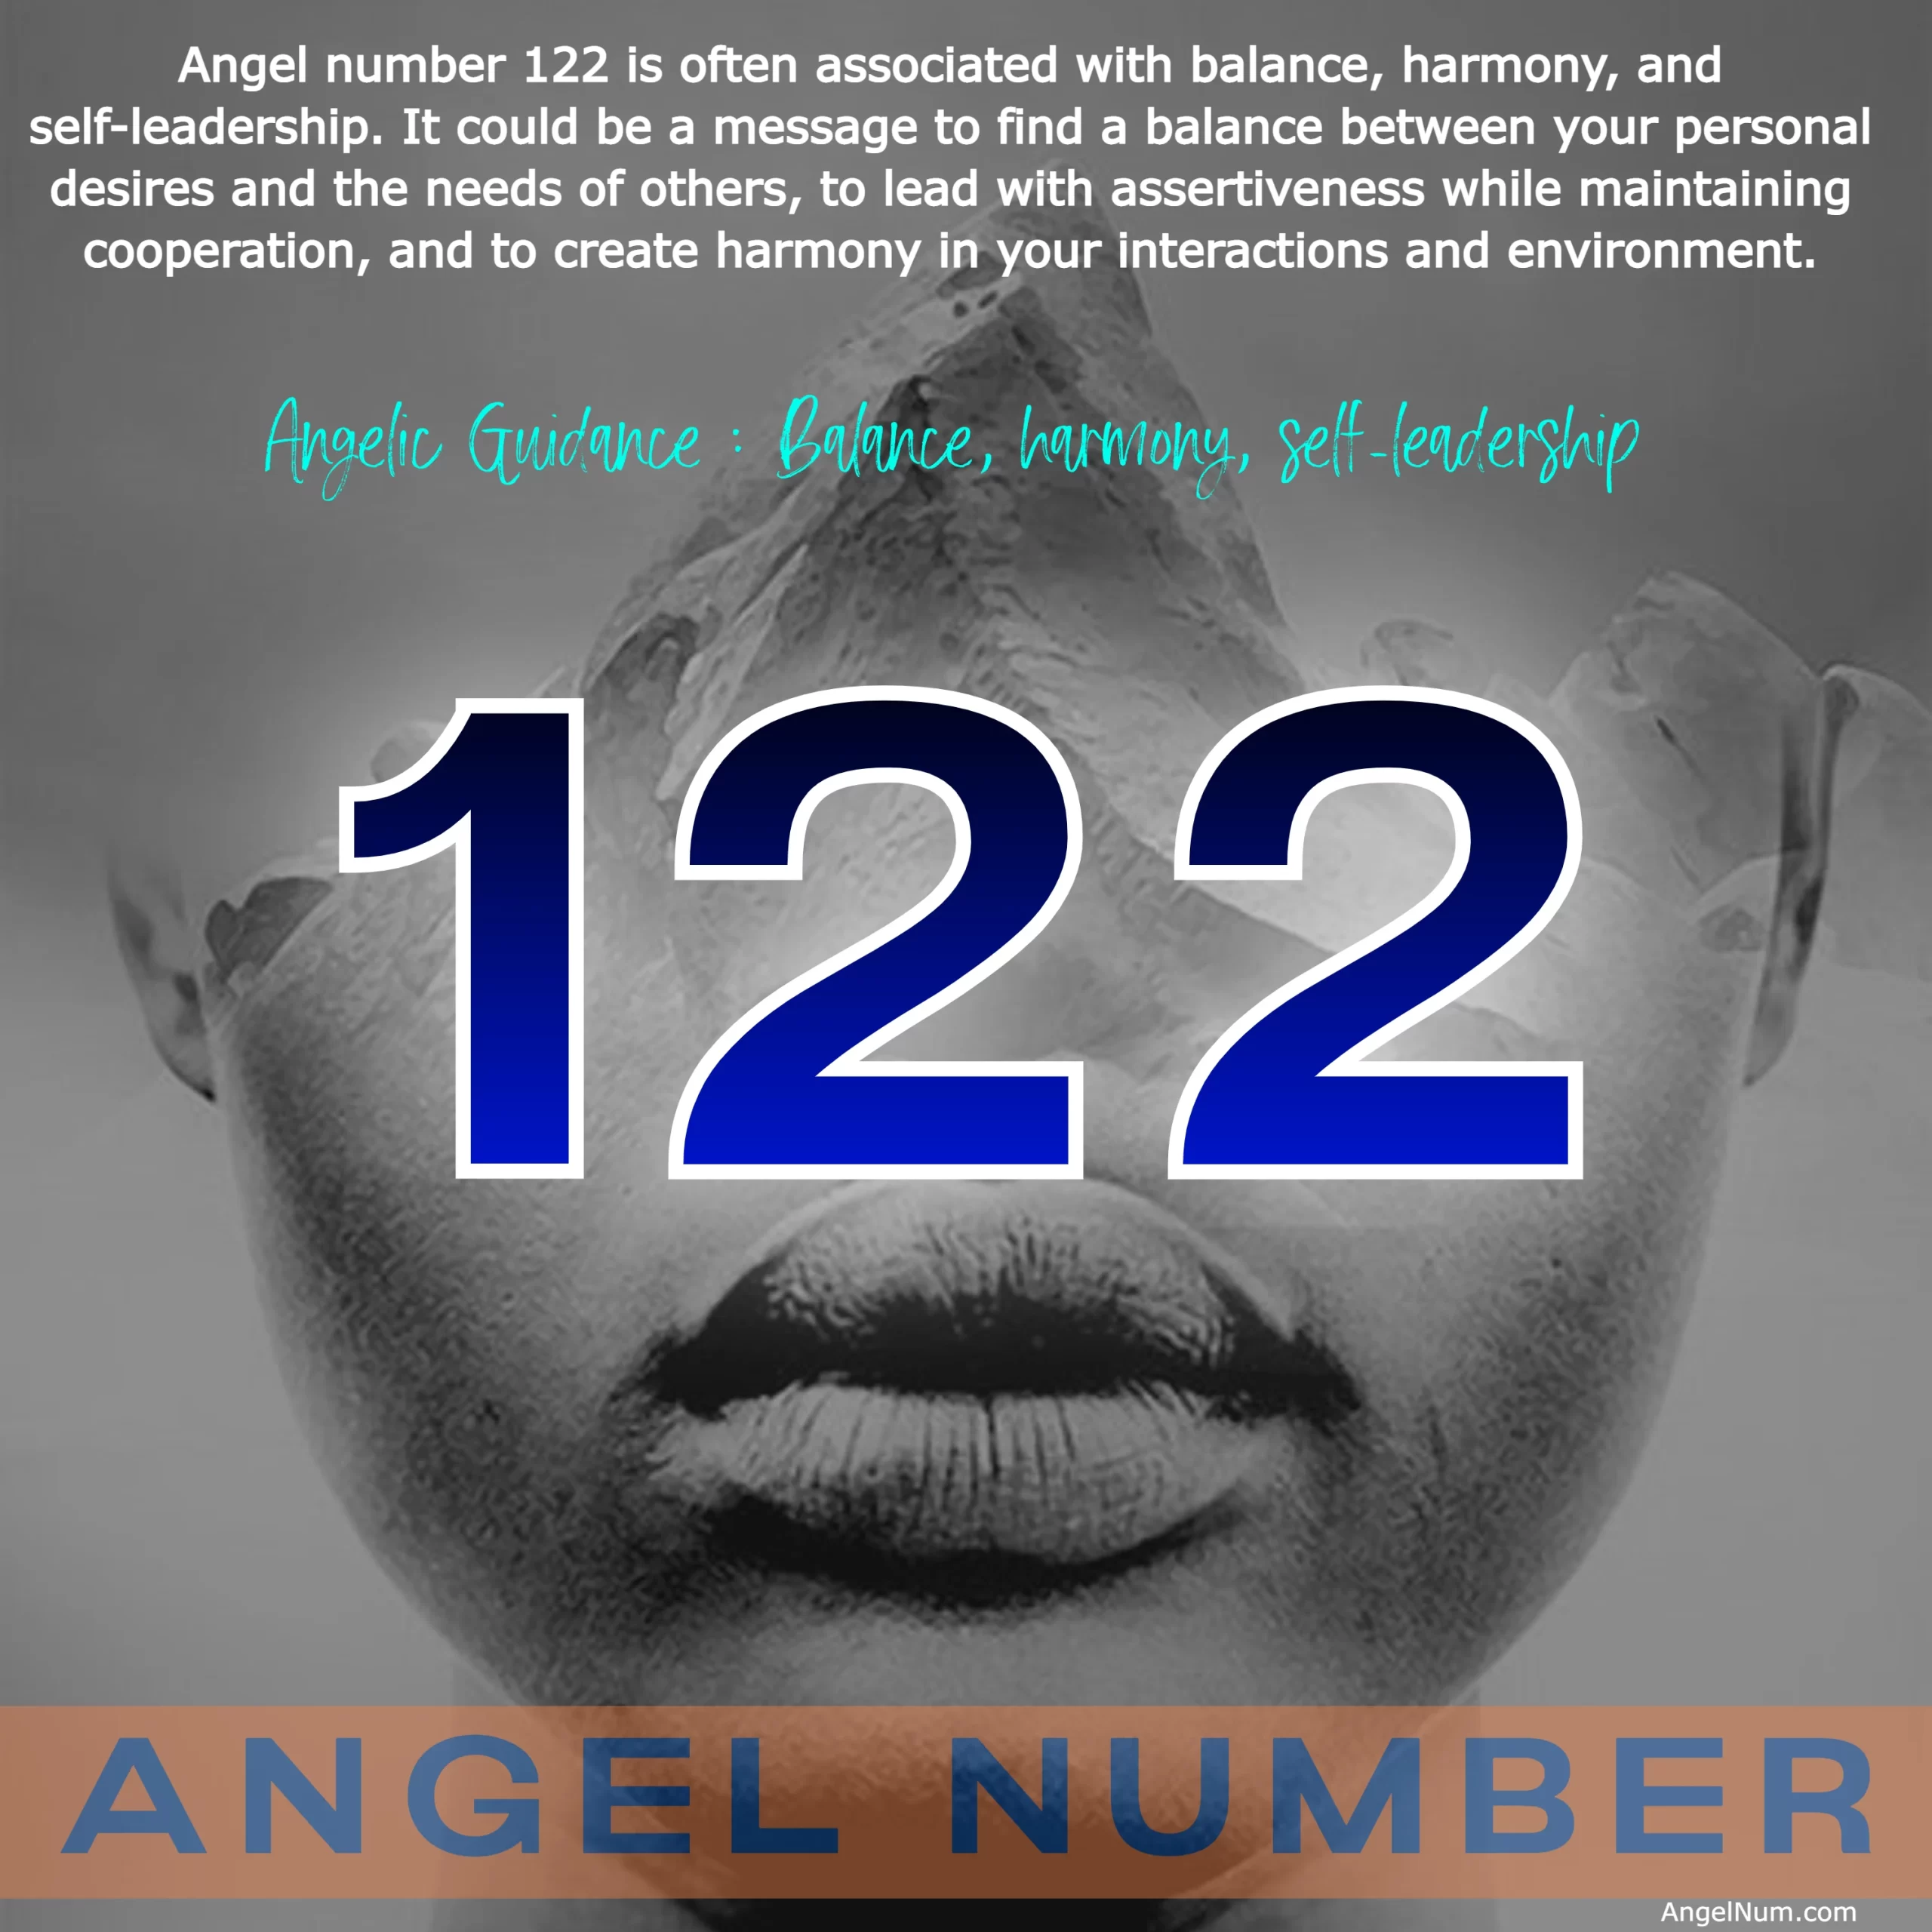 Decoding Angel Number 122: Meaning, Symbolism, and Guidance